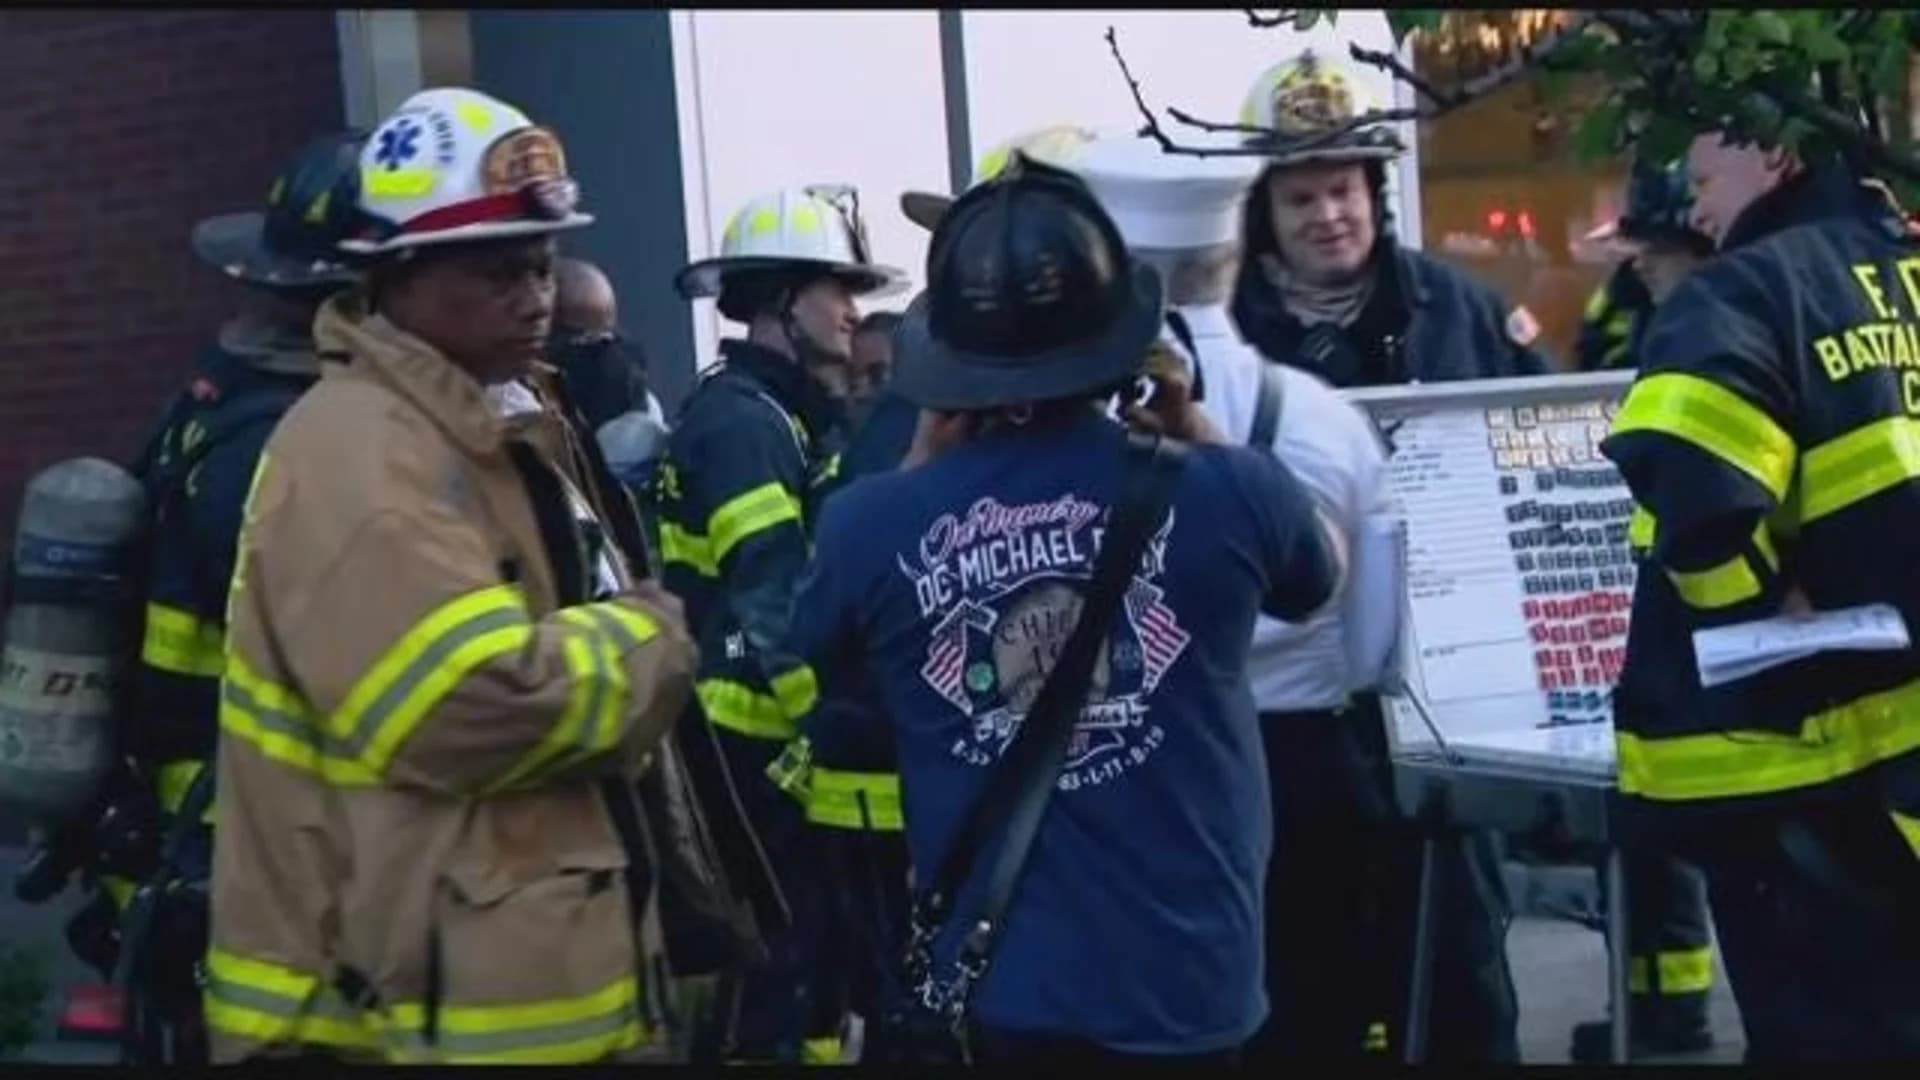 Fire marshals: Fires at Montefiore, NYC Health + Hospitals were accidental